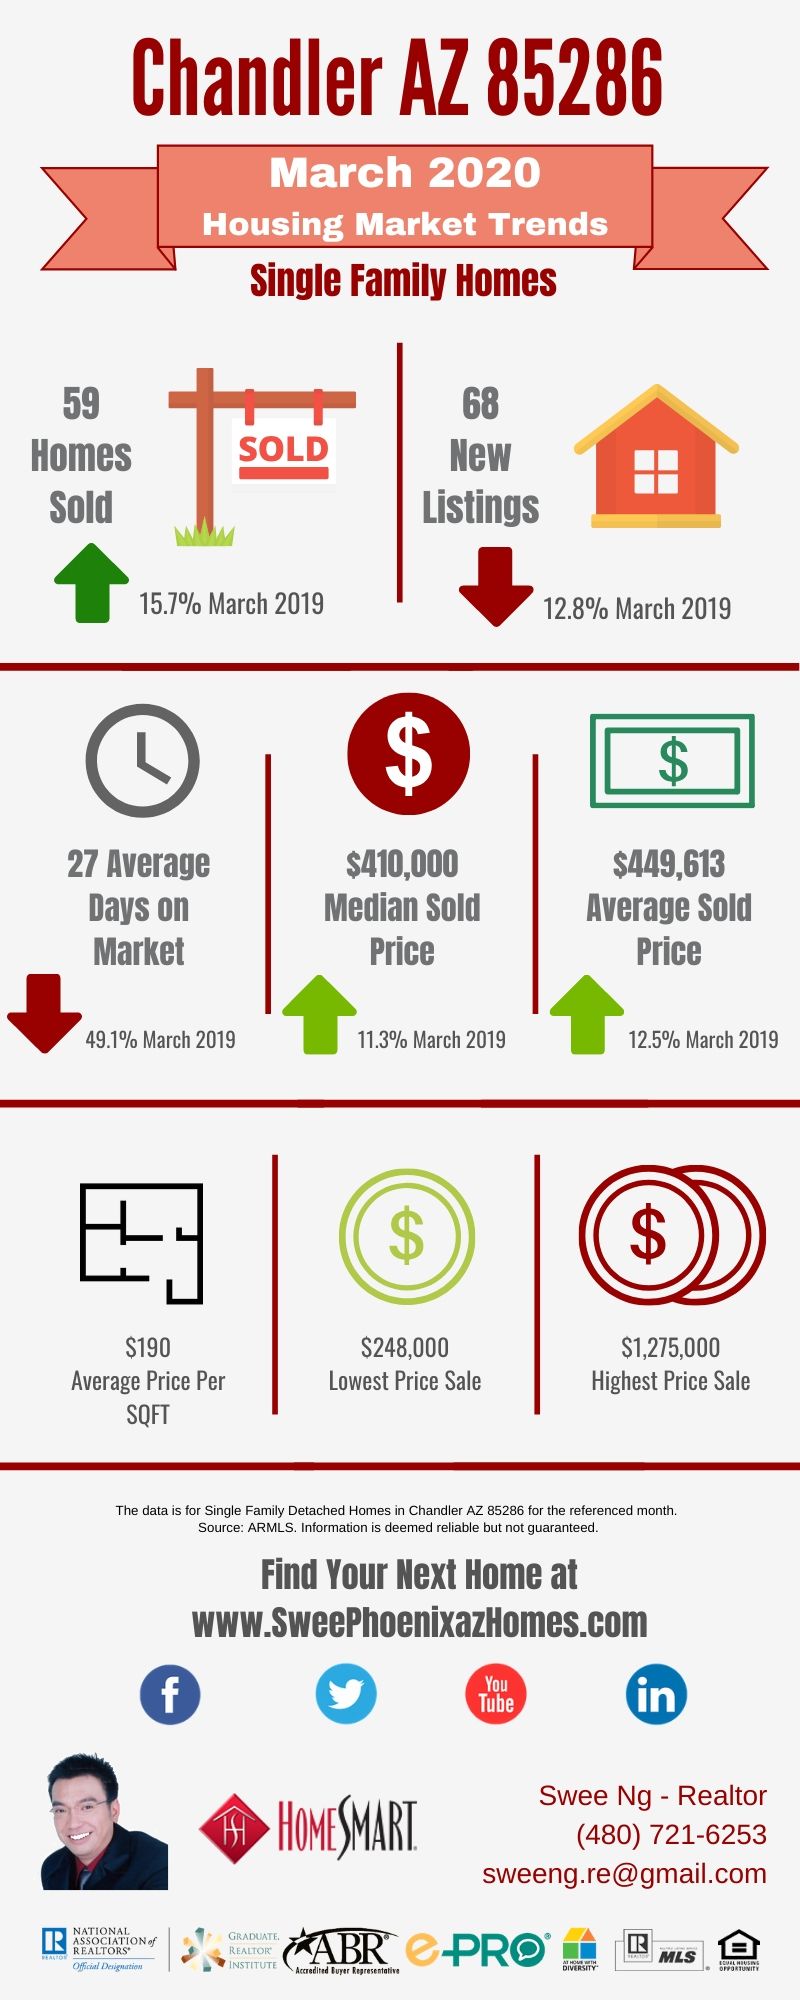 Chandler AZ 85286 Housing Market Trends Report March 2020, House Value, Real Estate and Statistic by Swee Ng